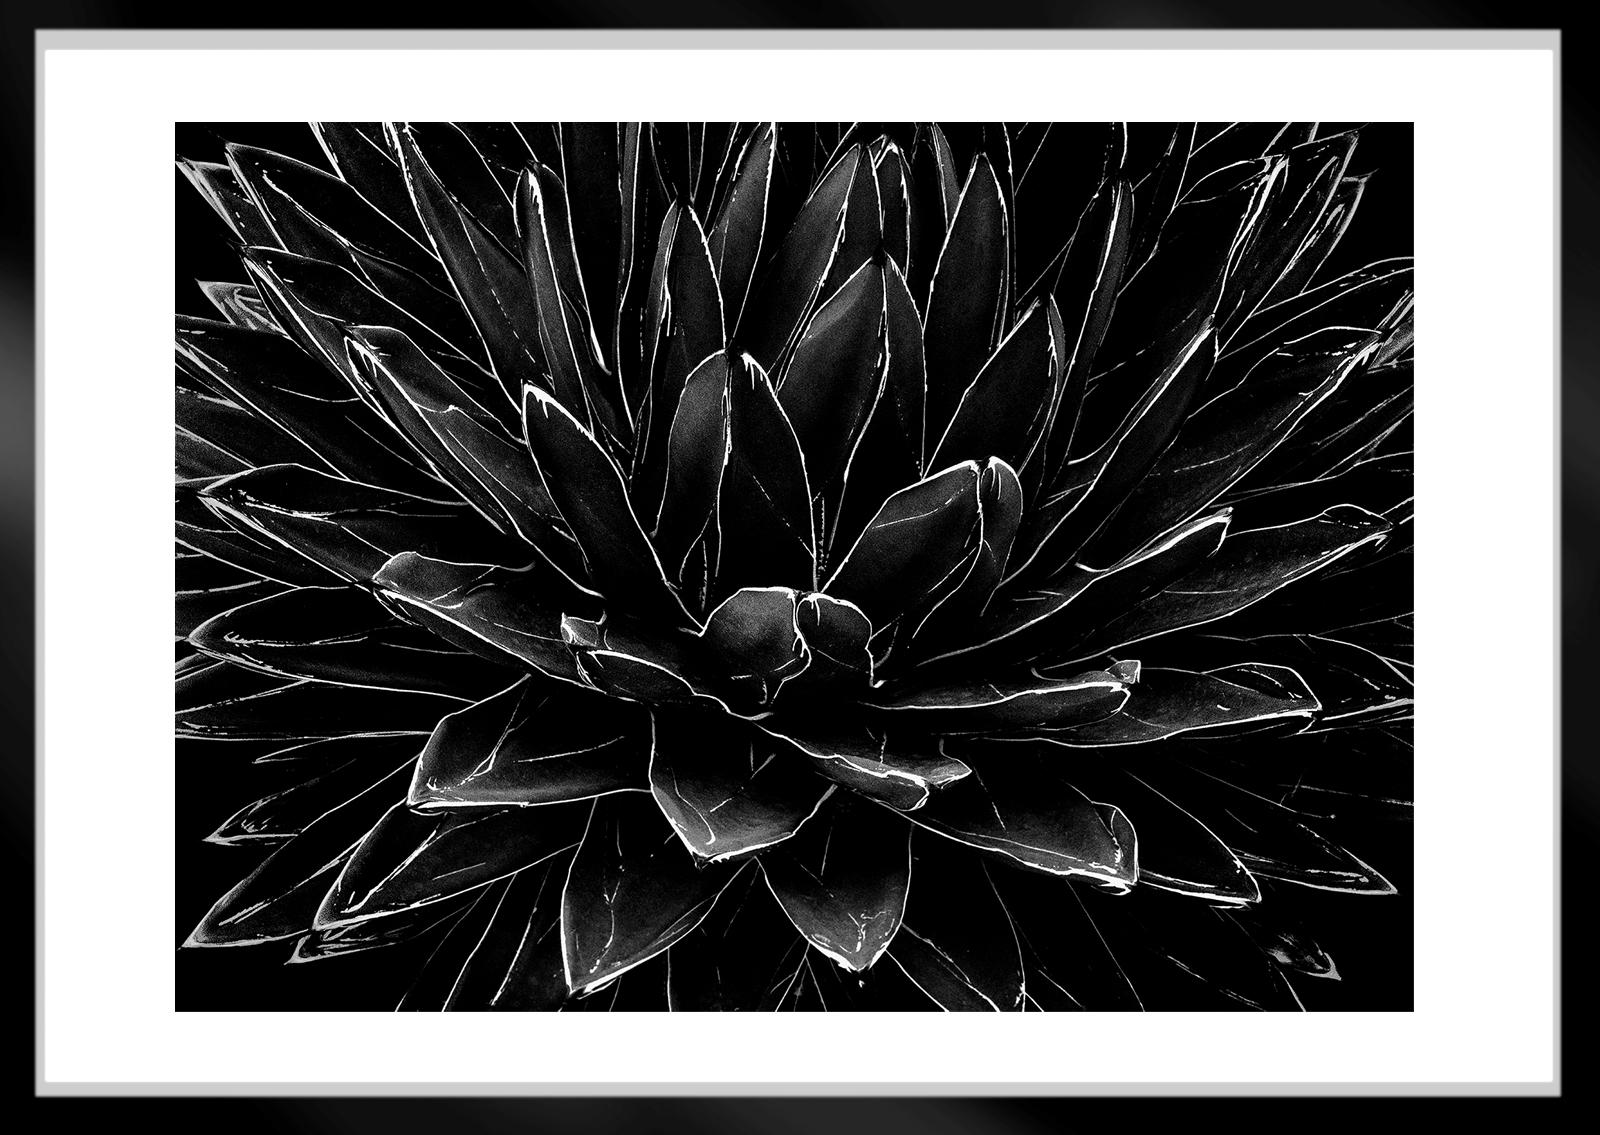 Cactus - Signed limited edition archival pigment print, 1989  -  Edition of 5

 This image was captured on film. 
The negative was scanned creating a digital file which was then printed on Hahnemühle Photo Rag® Baryta 315 gsm (Acid-free and